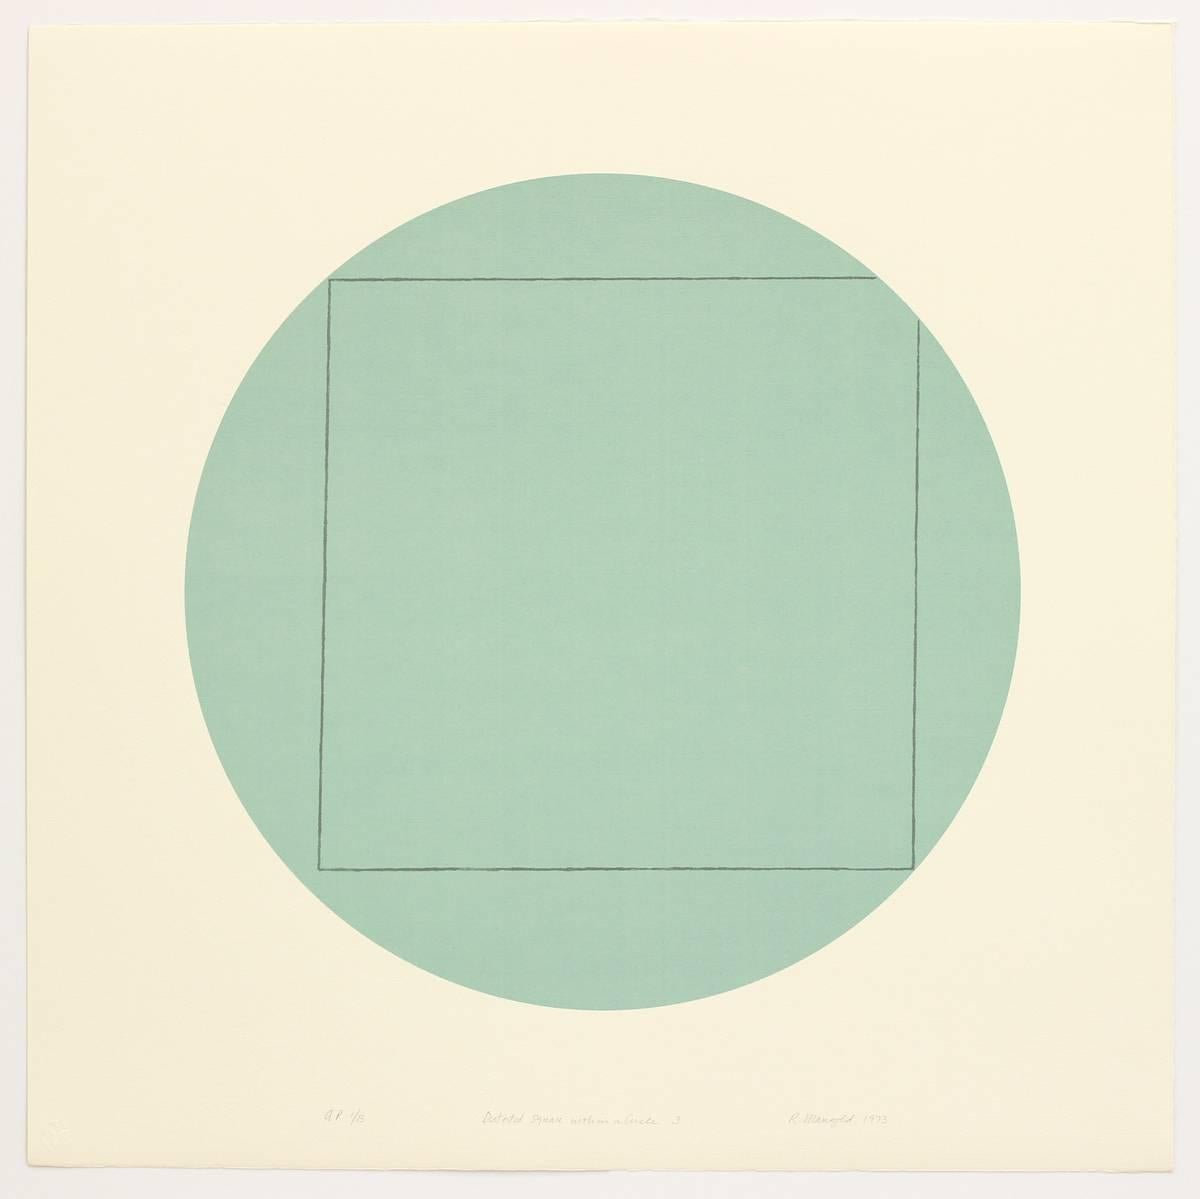 Distorted Square Within A Circle - Print by Robert Mangold